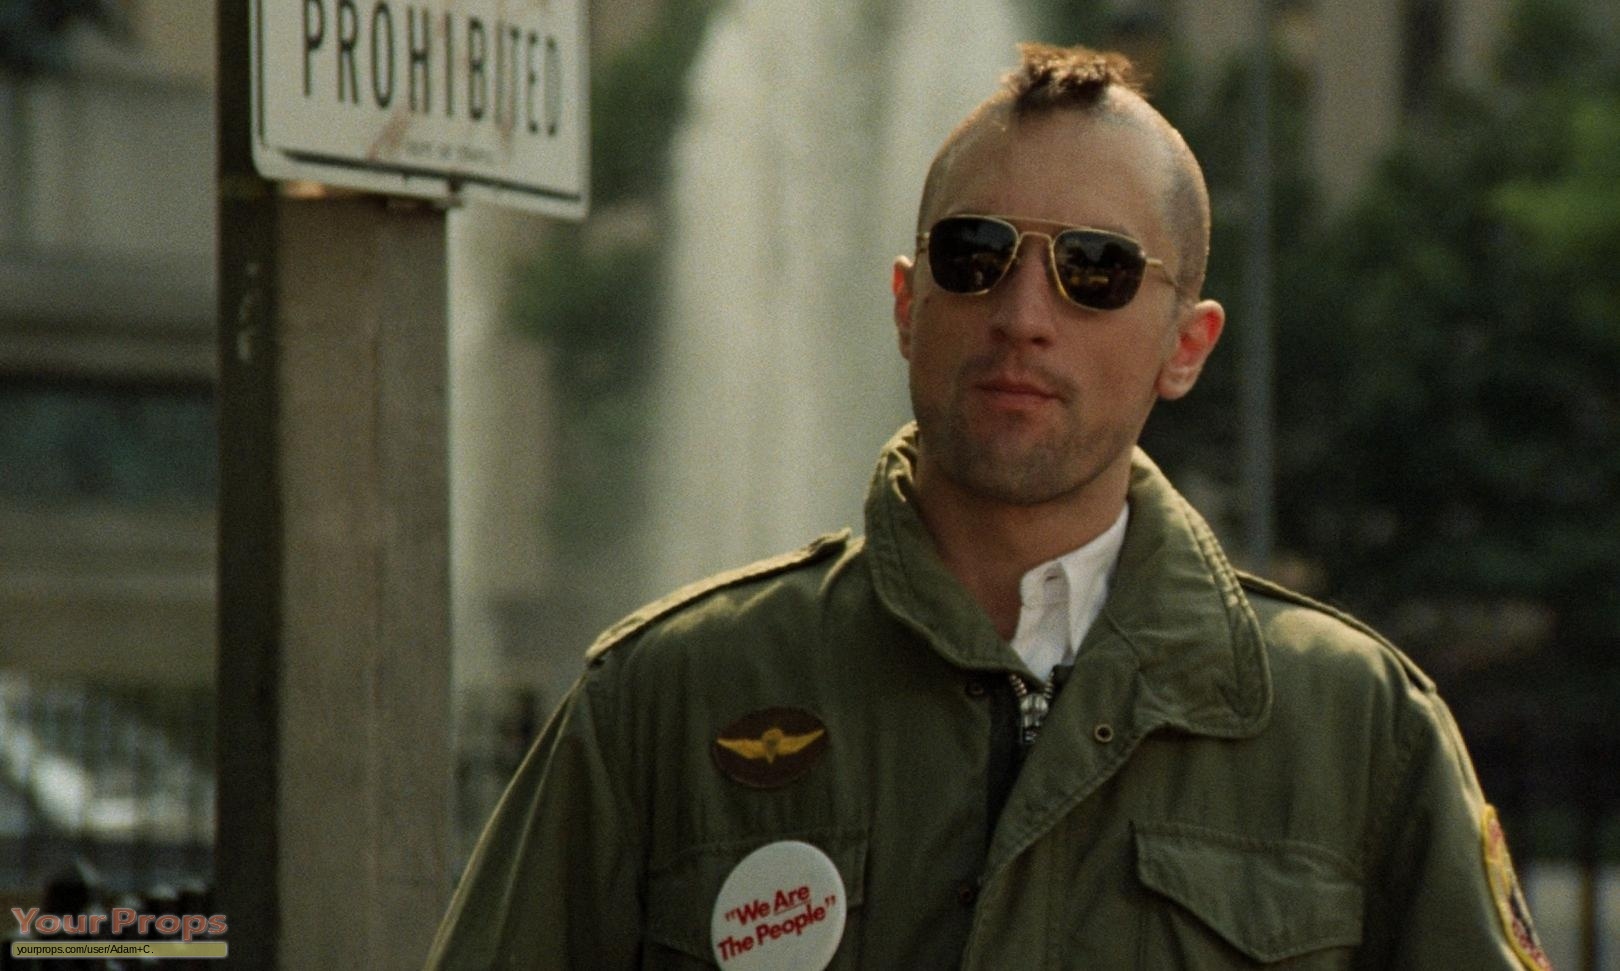 Taxi-Driver-Travis-Bickle-s-M-65-Field-Jacket-with-patches-and-campaign-button-5.jpg